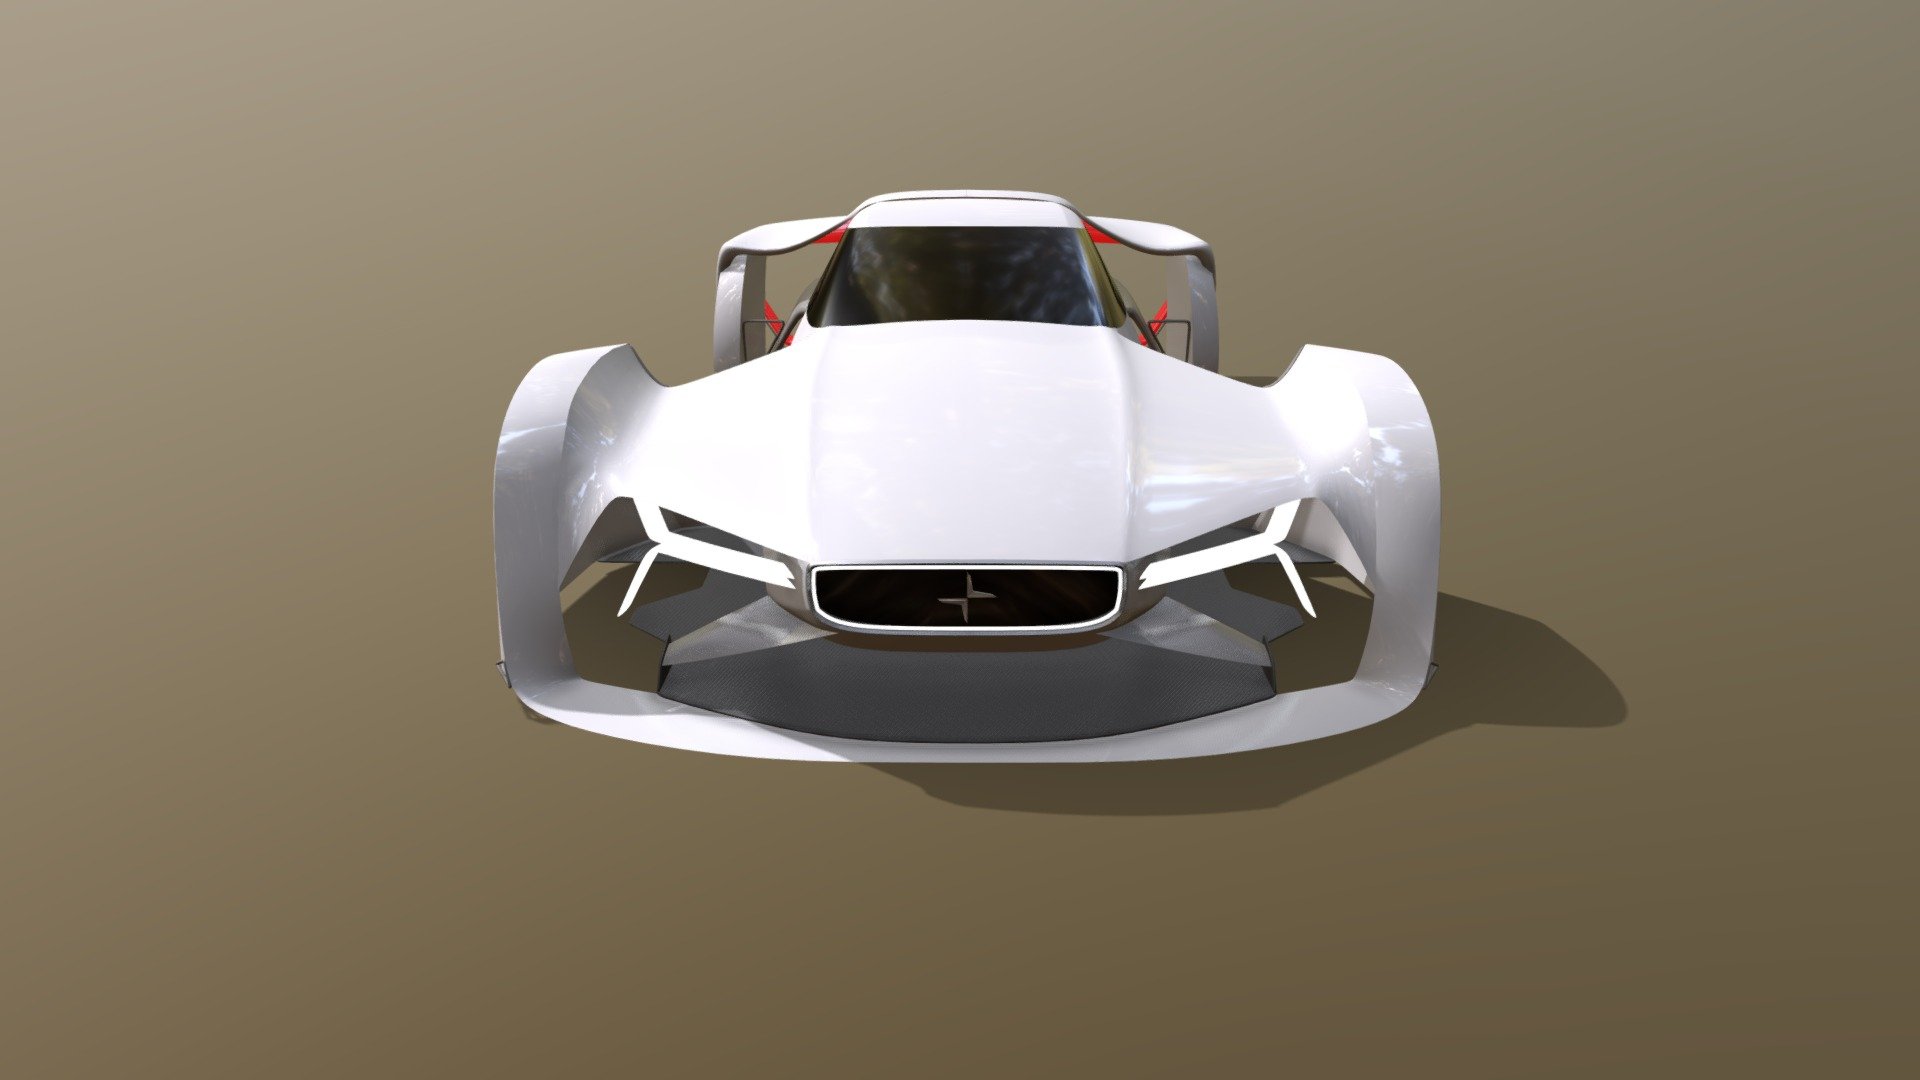 Stretching into more of a conceptual form study, this is my take on a futuristic 2 seater Polestar vehicle 3d model